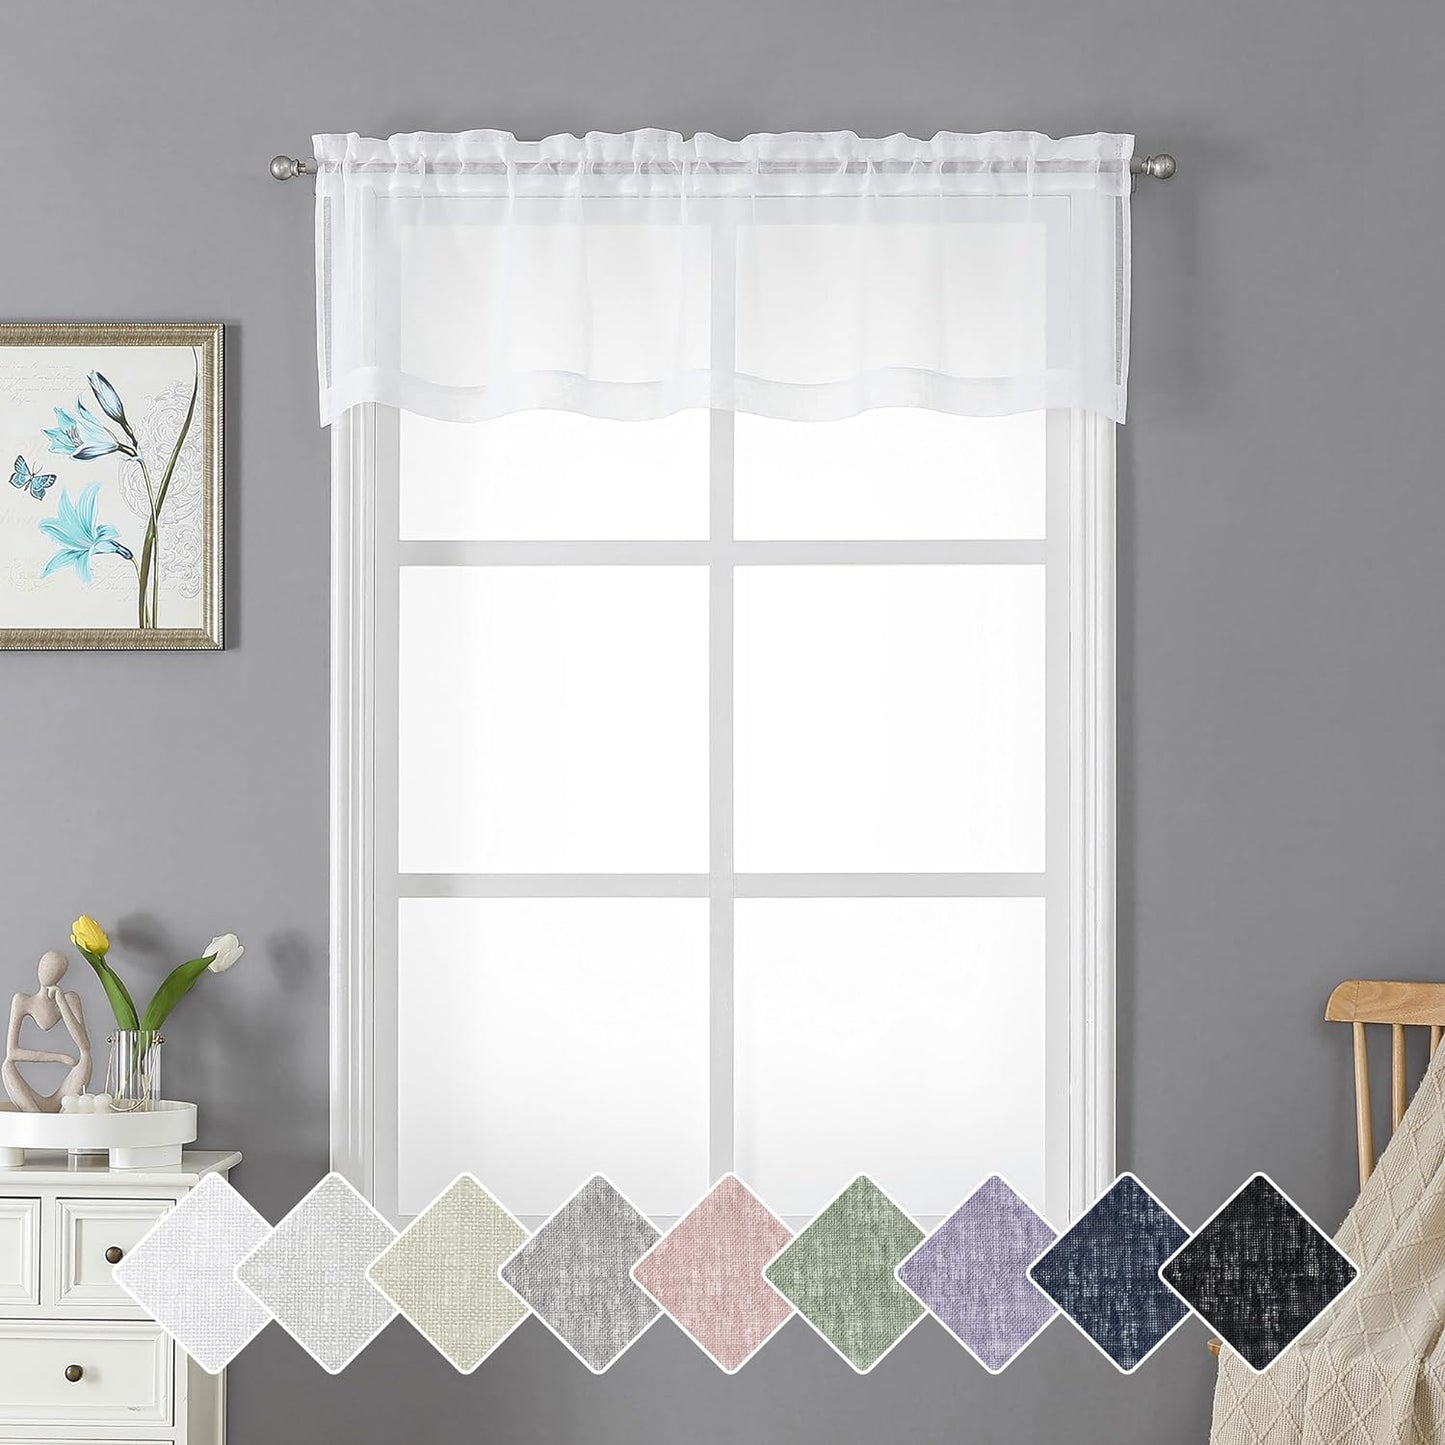 Lecloud Doris Faux Linen Sheer Grey Valance Curtains 14 Inches Length, Cafe Kitchen Bedroom Living Room Gauzy Silver Grey Curtain for Small Window, Slub Light Gray Valance Dual Rod Pockets 60X14 Inch  Lecloud White 60 W X 14 L 